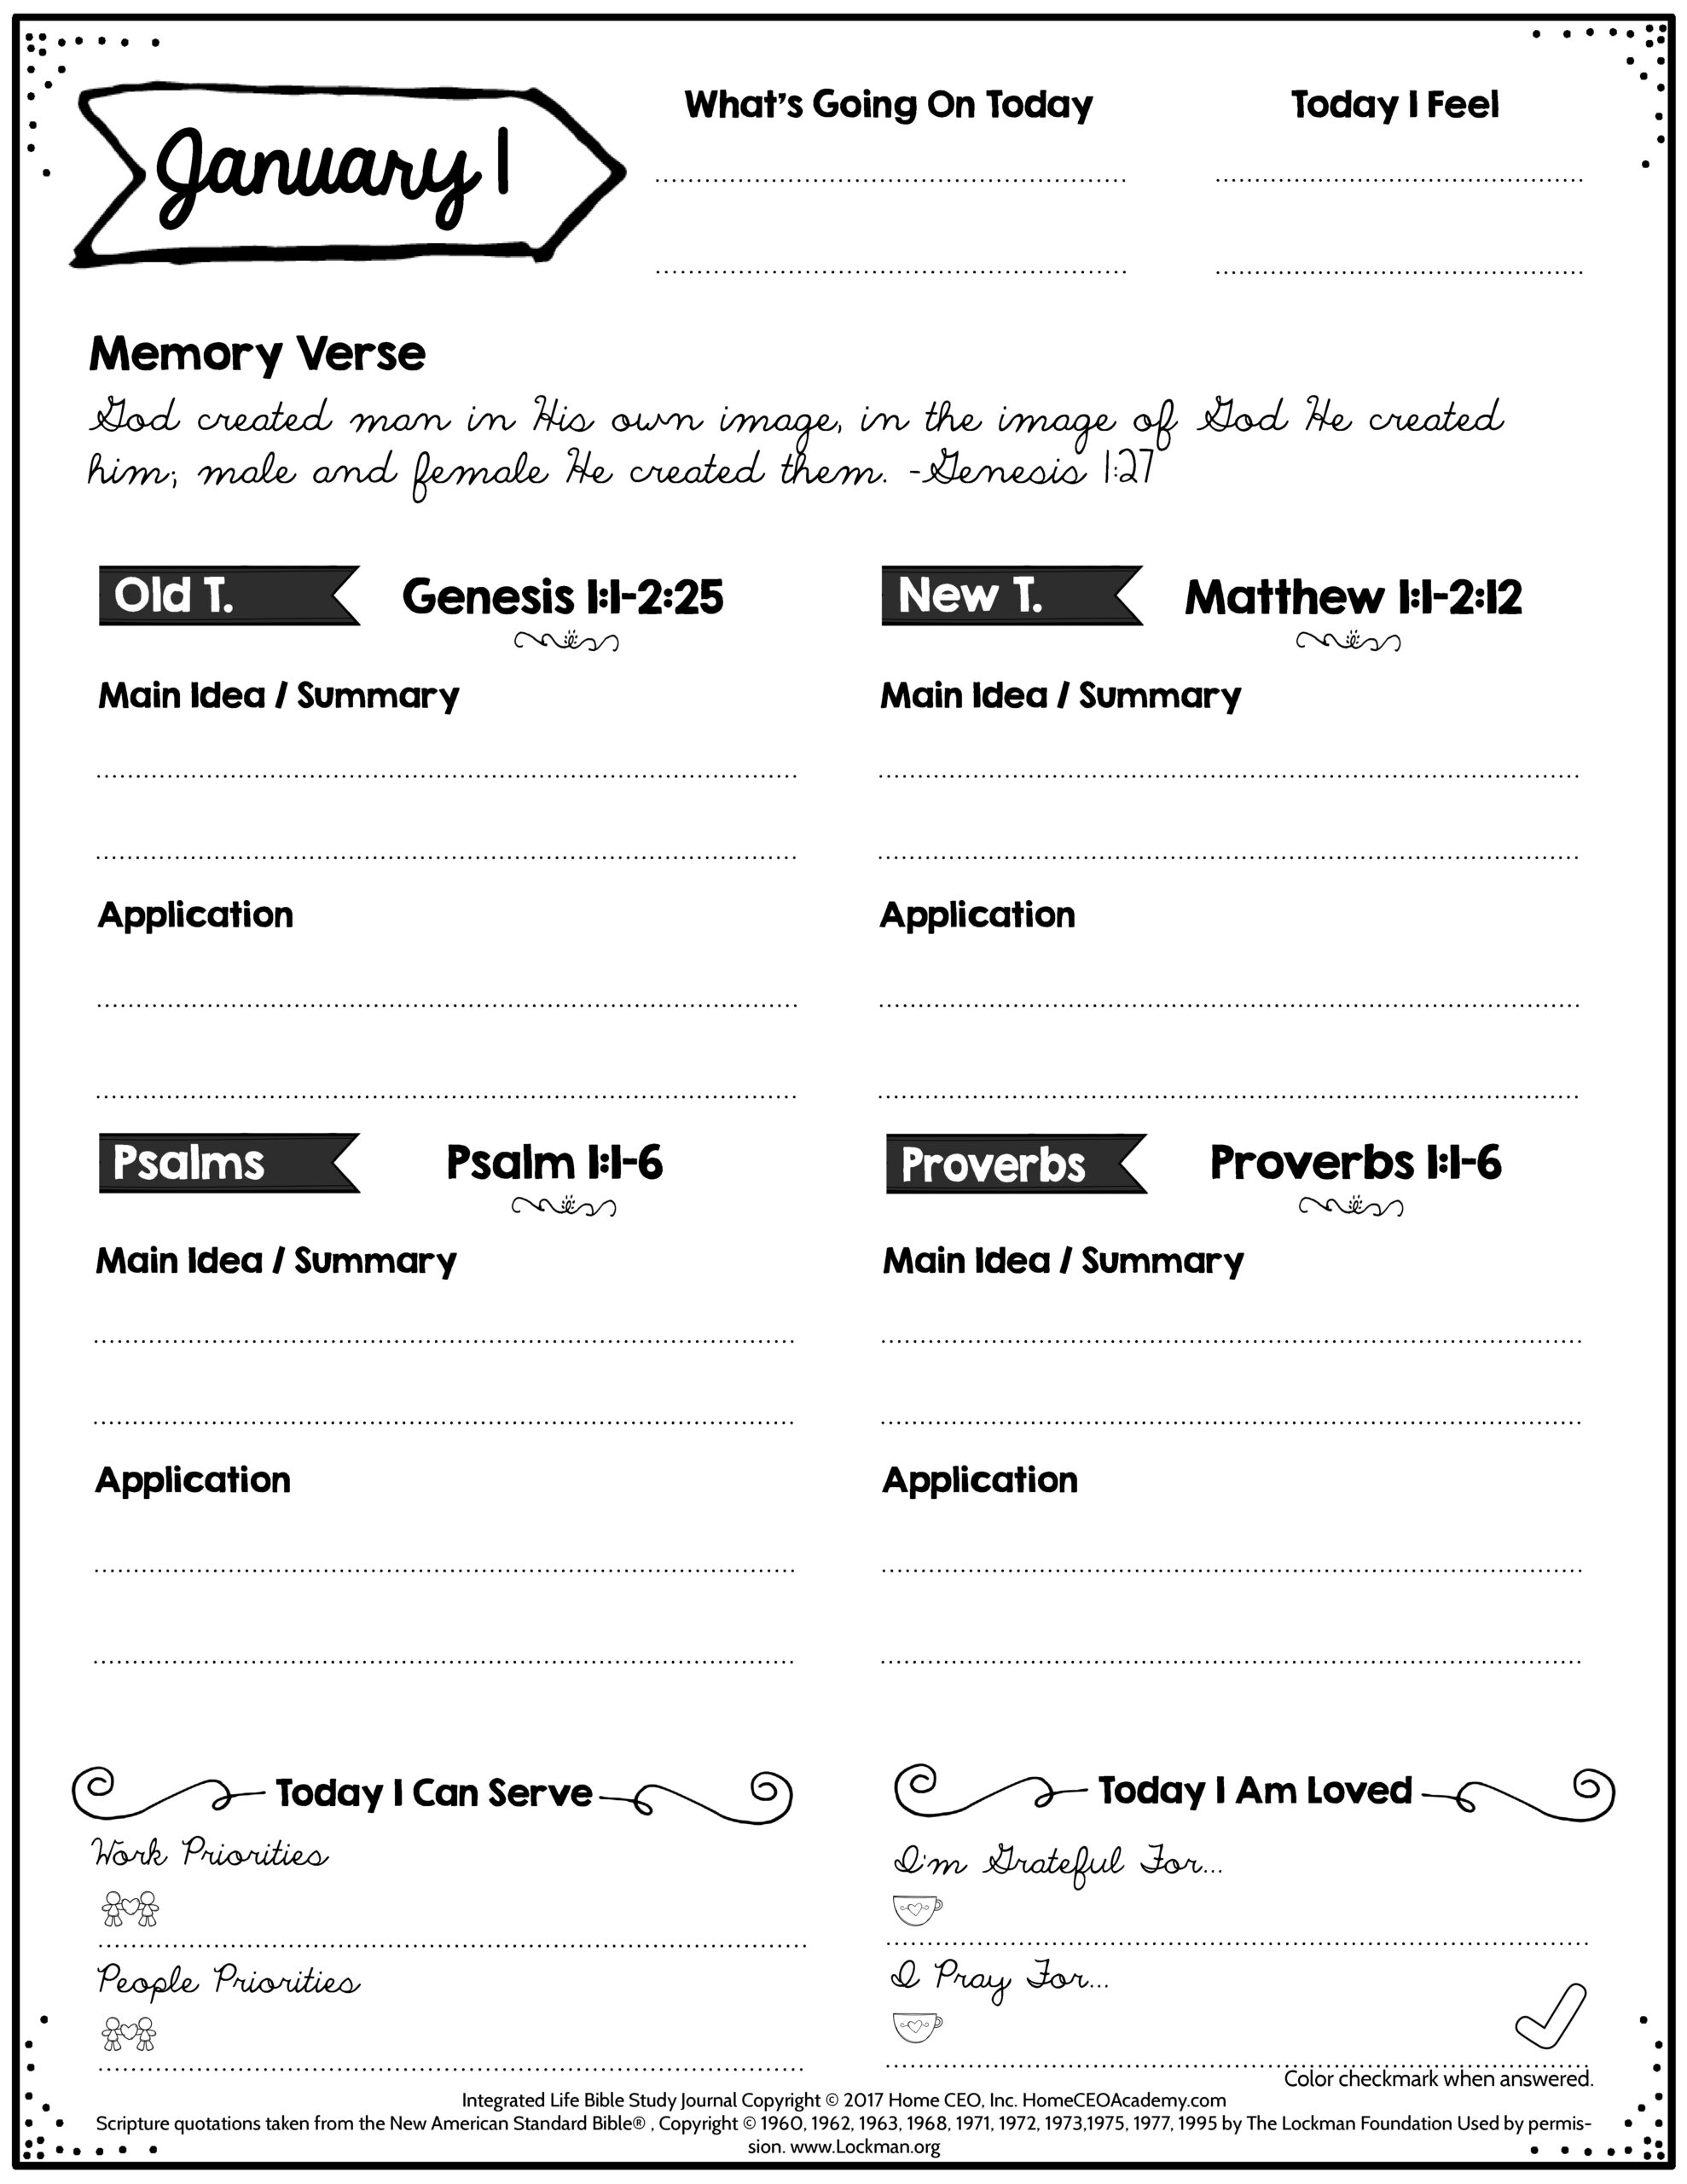 Free Bible Study Printables intended for Free Printable Bible Study Lessons